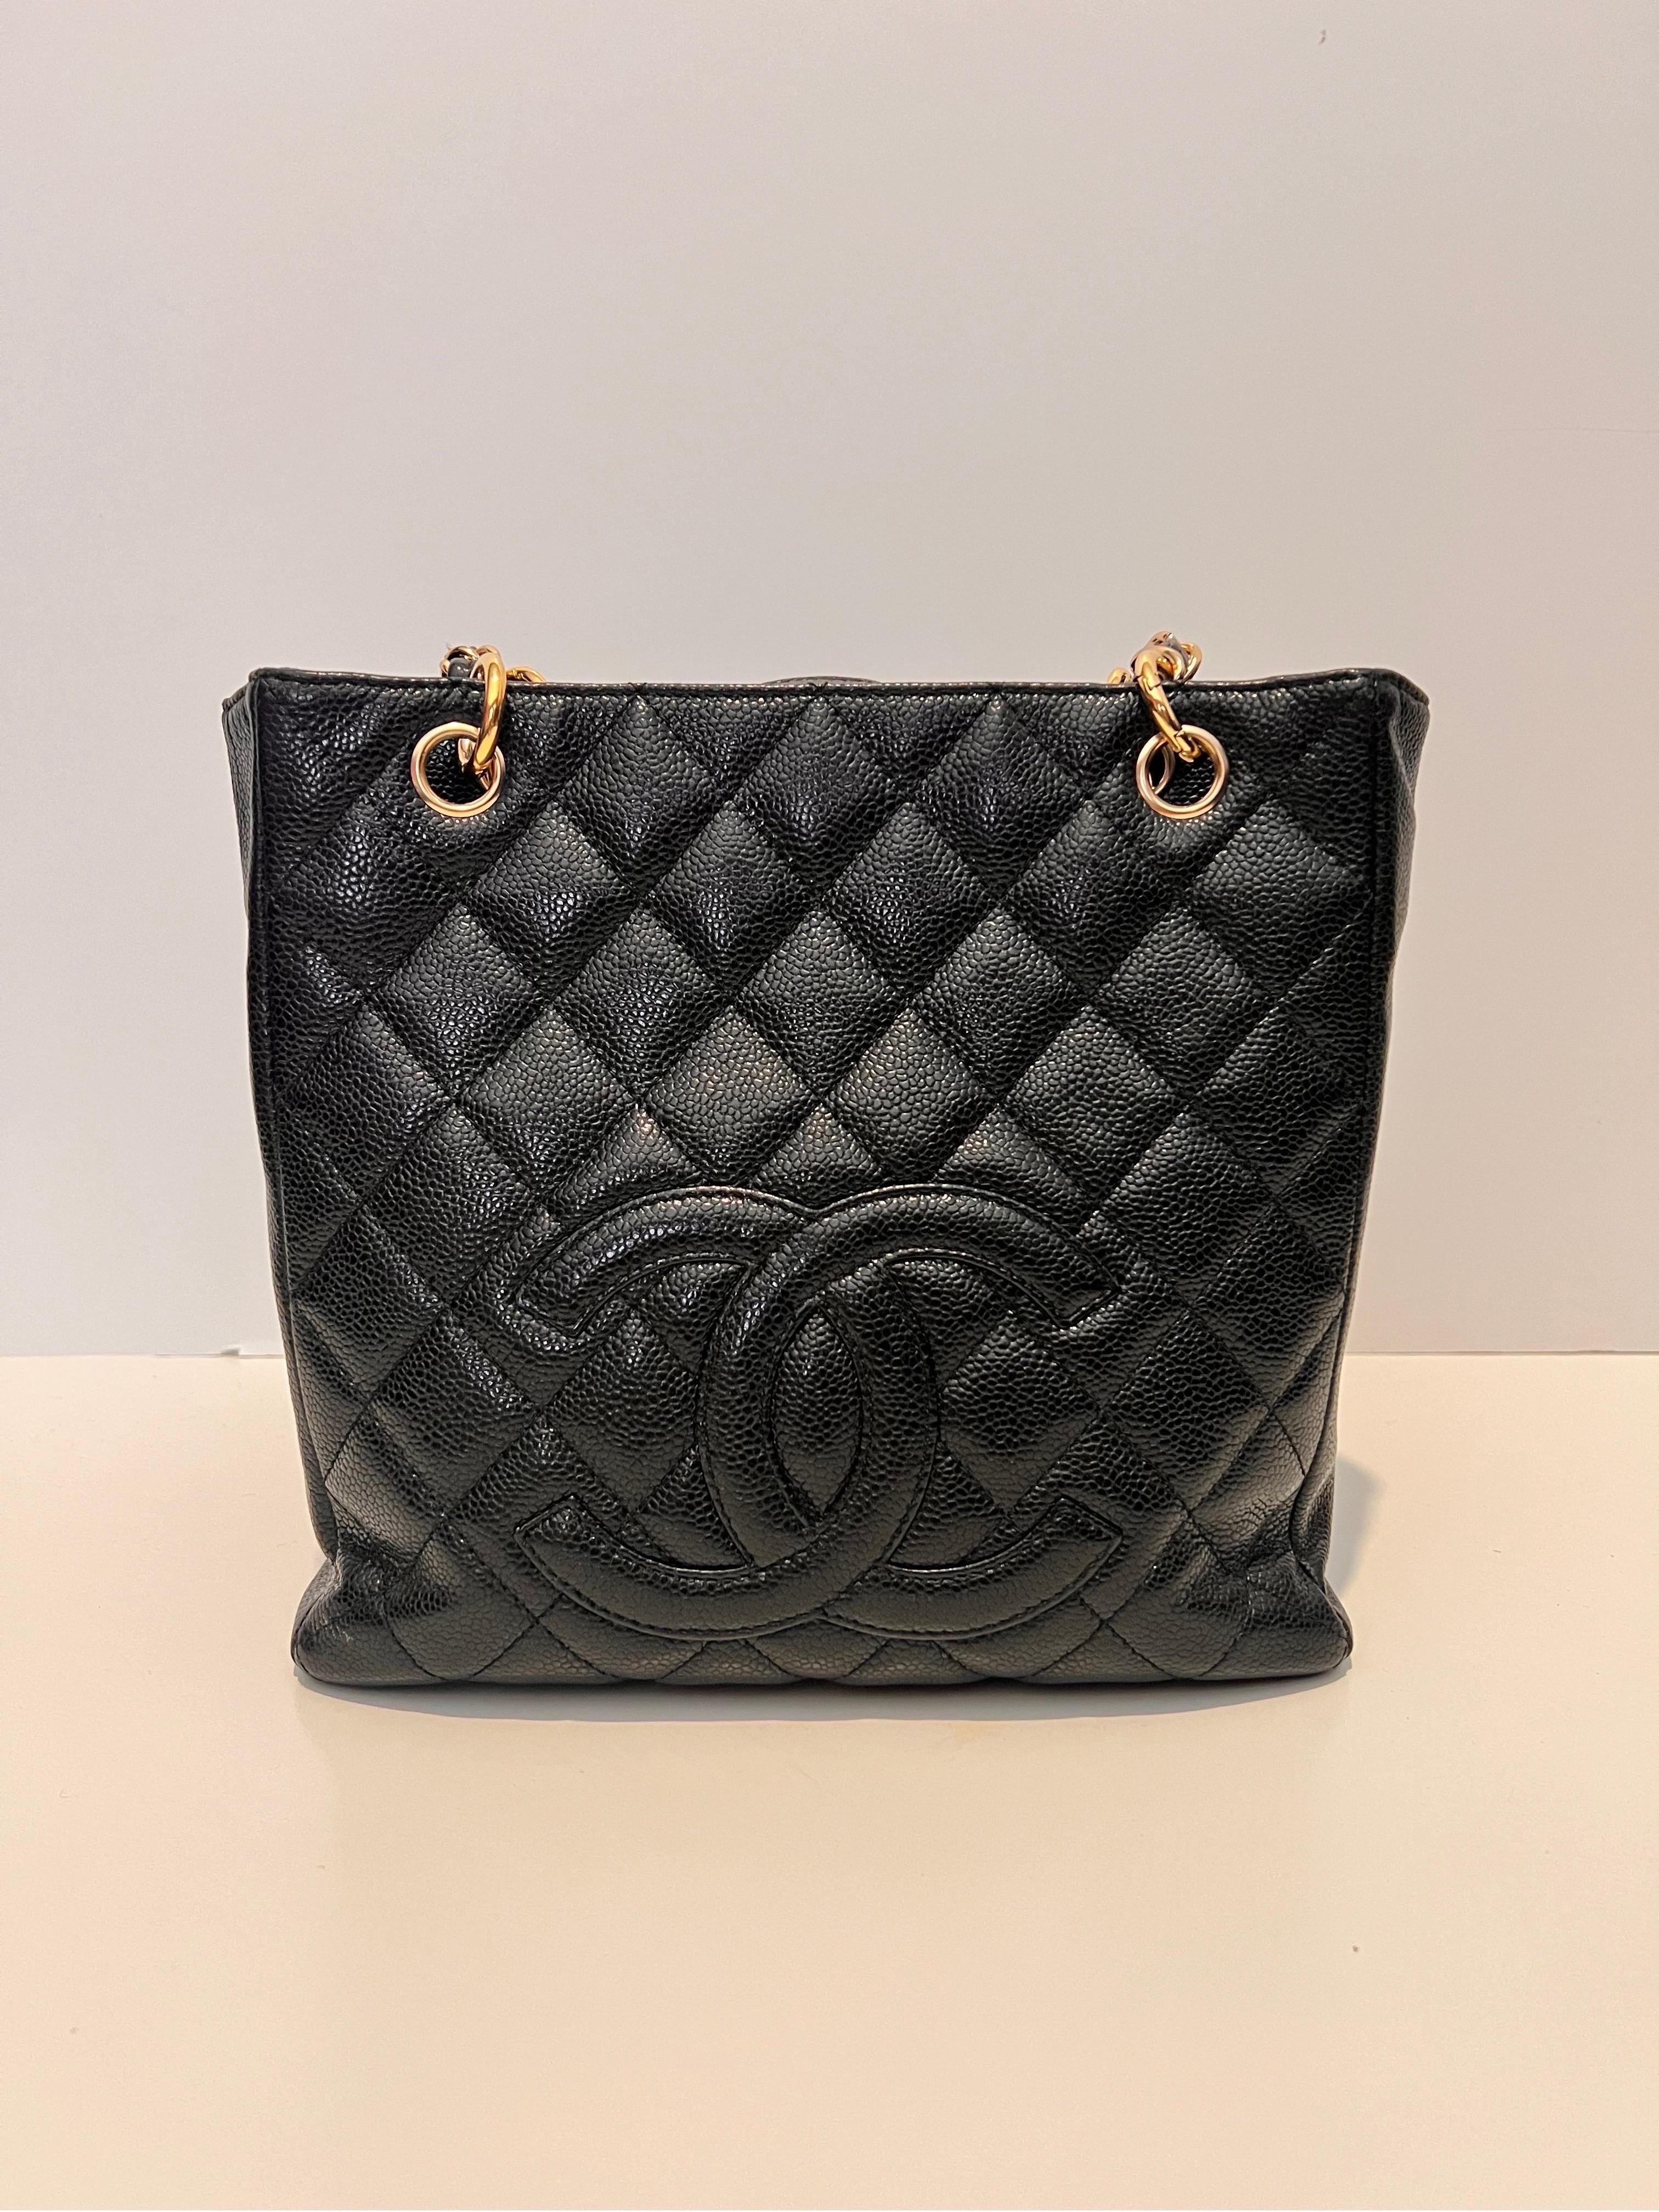 Chanel Black Quilted Caviar Leather Grand Shopping Tote.
Caviar Leather Handbag with iconic gold chain. Discontinued in 2015, the Grand Shopping tote bag is one CHANEL rarity that is highly treasured. This version was displays a classic design with